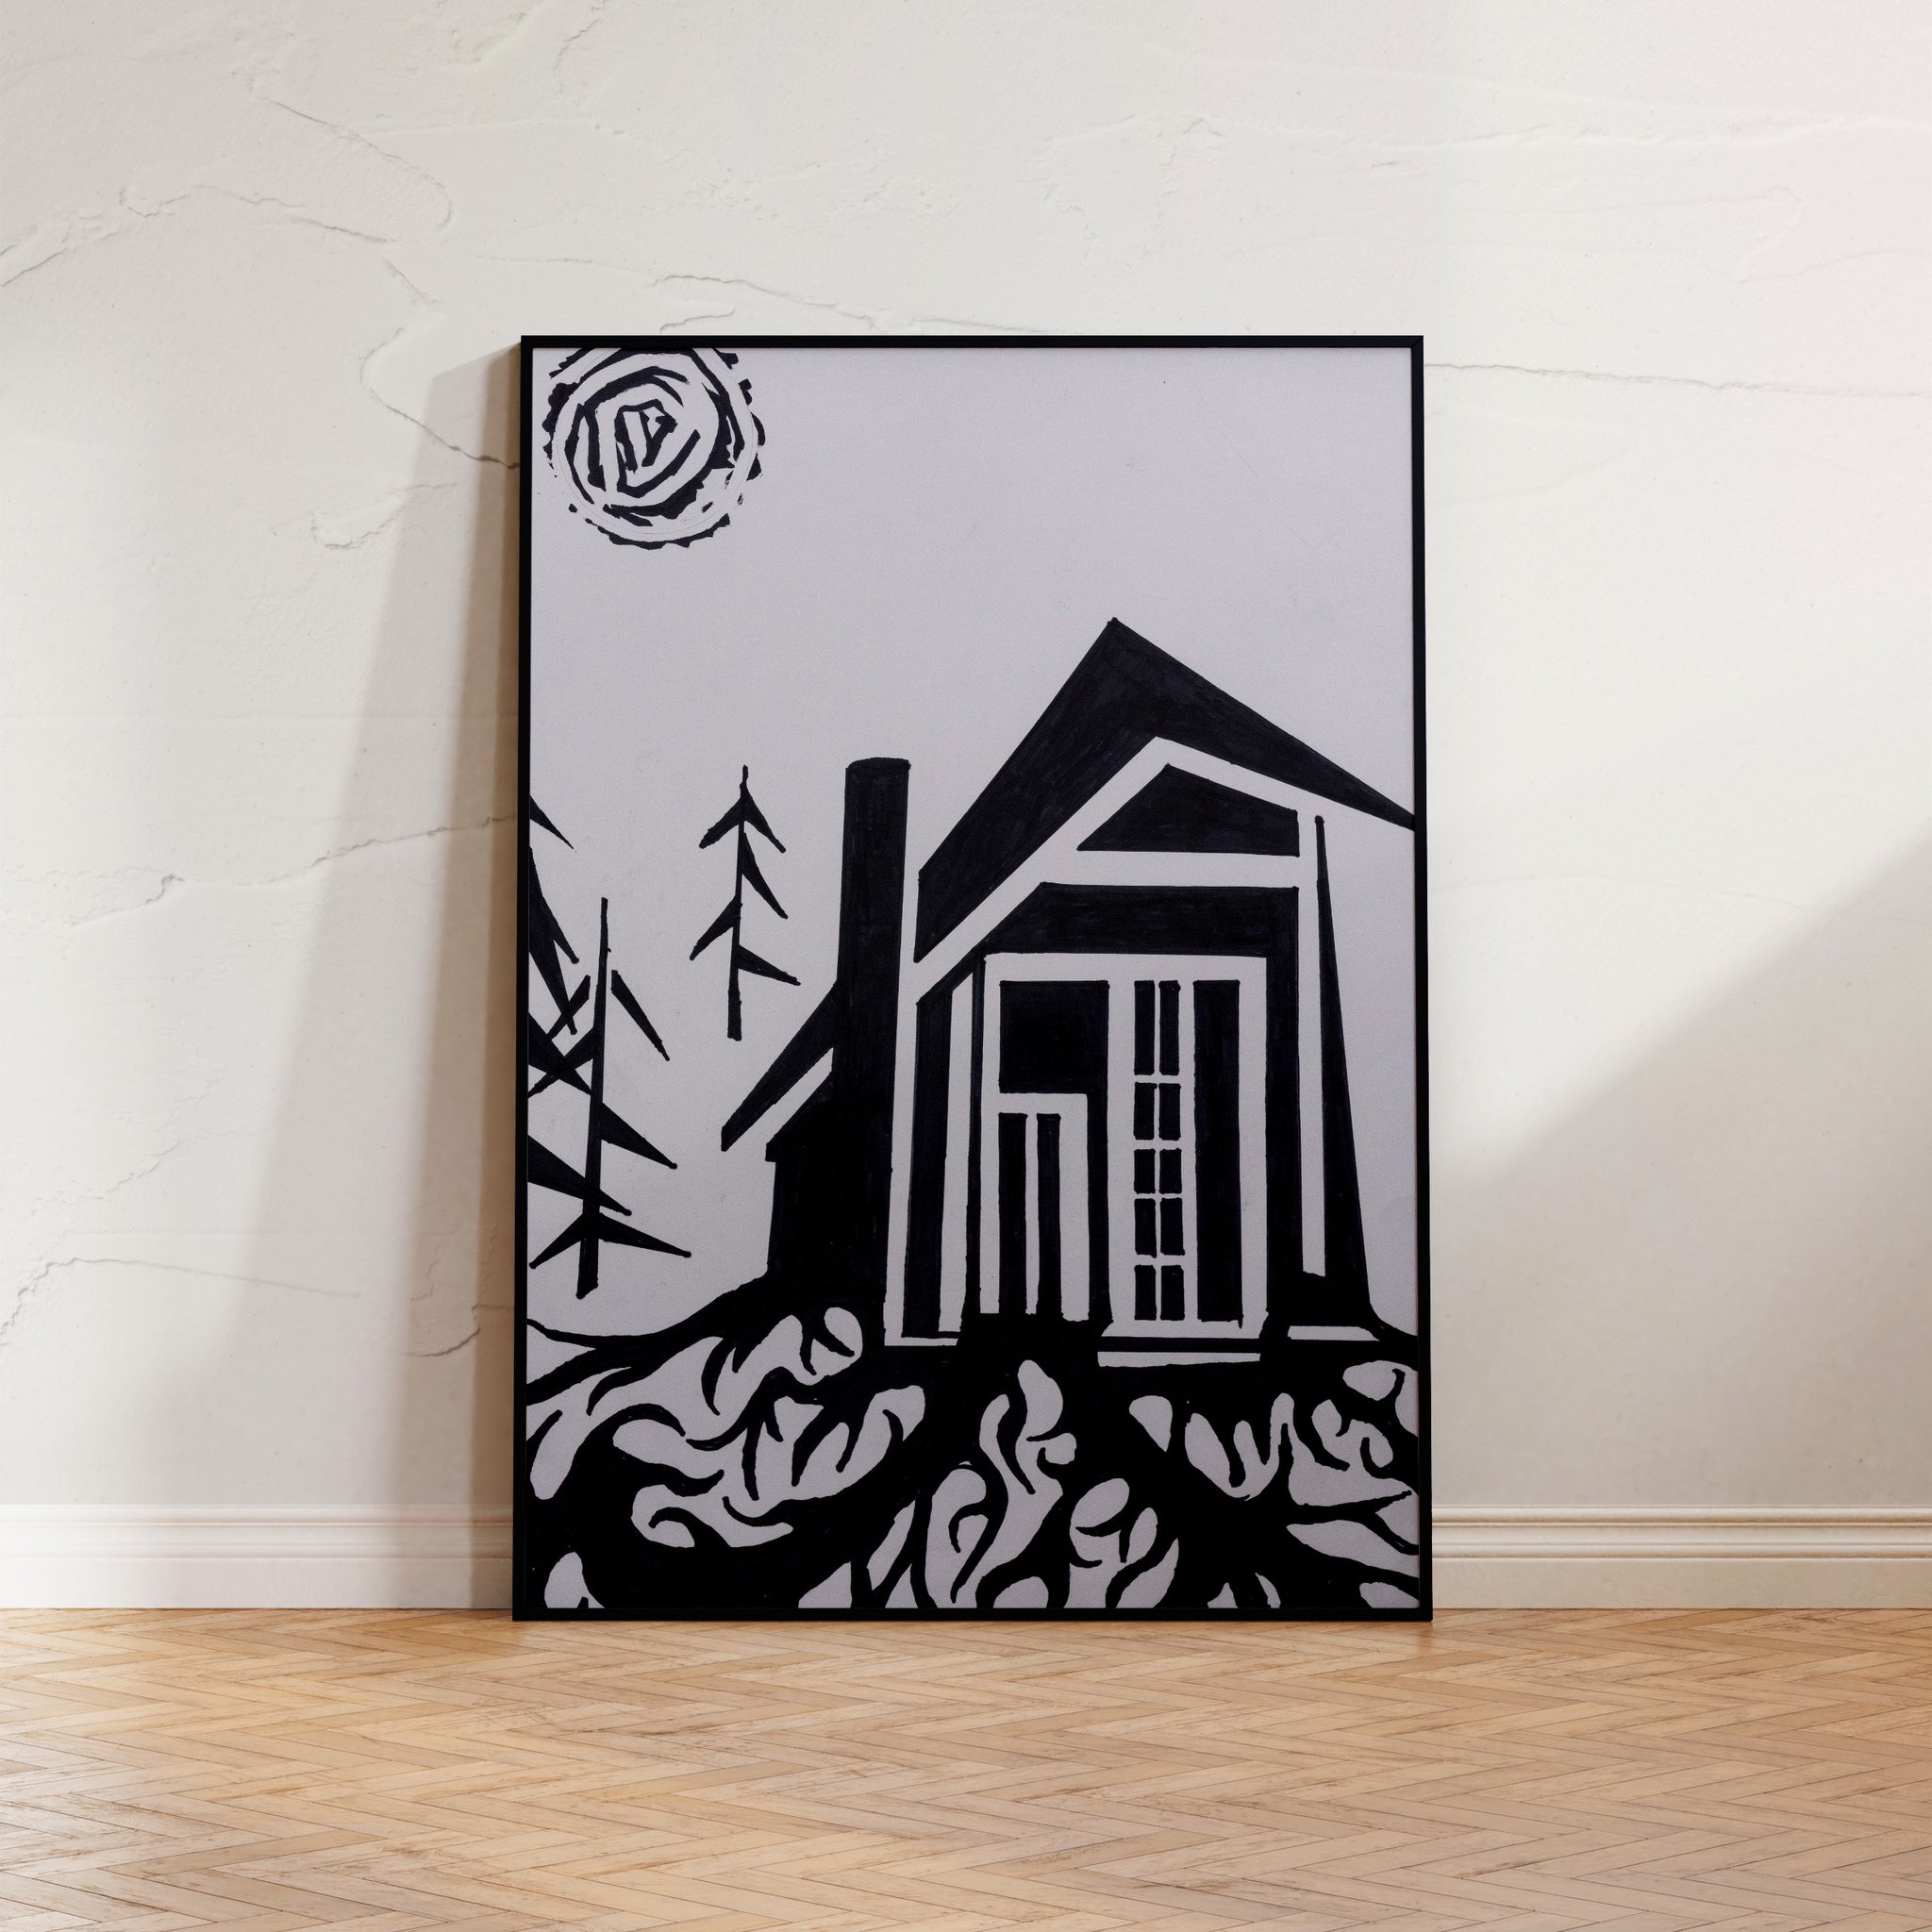 "Woodland Hideaway," a bold, monochrome art piece showcasing a rustic cabin nestled within a peaceful woodland, utilizing stencil-like outlines and negative space to evoke a tranquil, rural retreat.